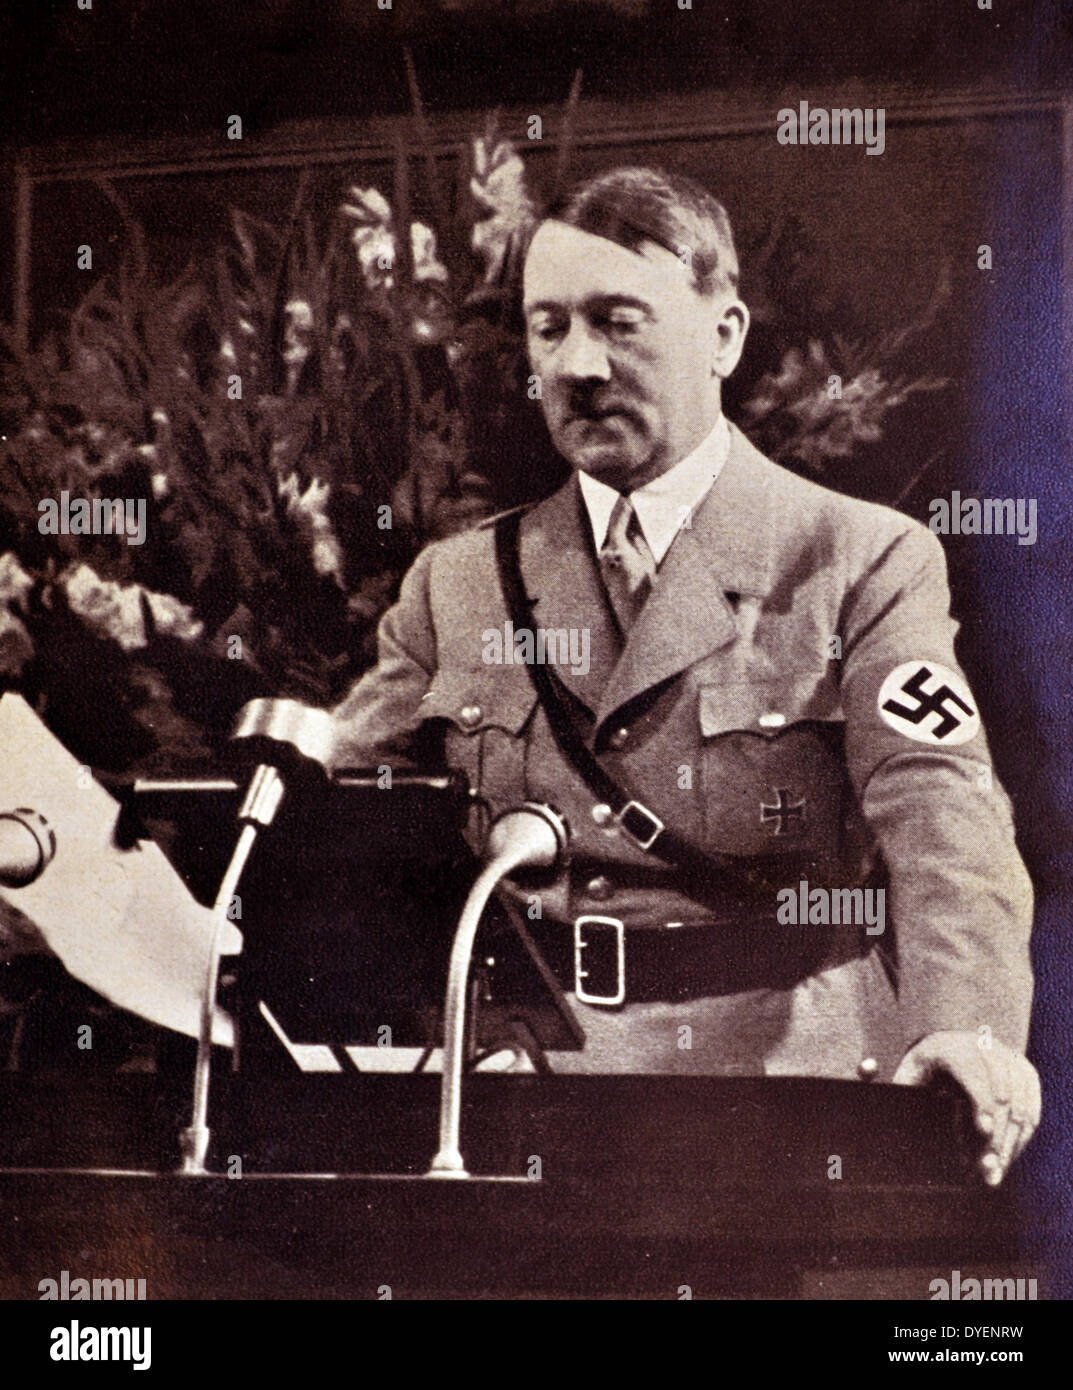 Adolf Hitler 1889-1945. addresses a rally 1936. German politician and the leader of the Nazi Party. He was chancellor of Germany from 1933 to 1945 and dictator of Nazi Germany from 1934 to 1945. Stock Photo